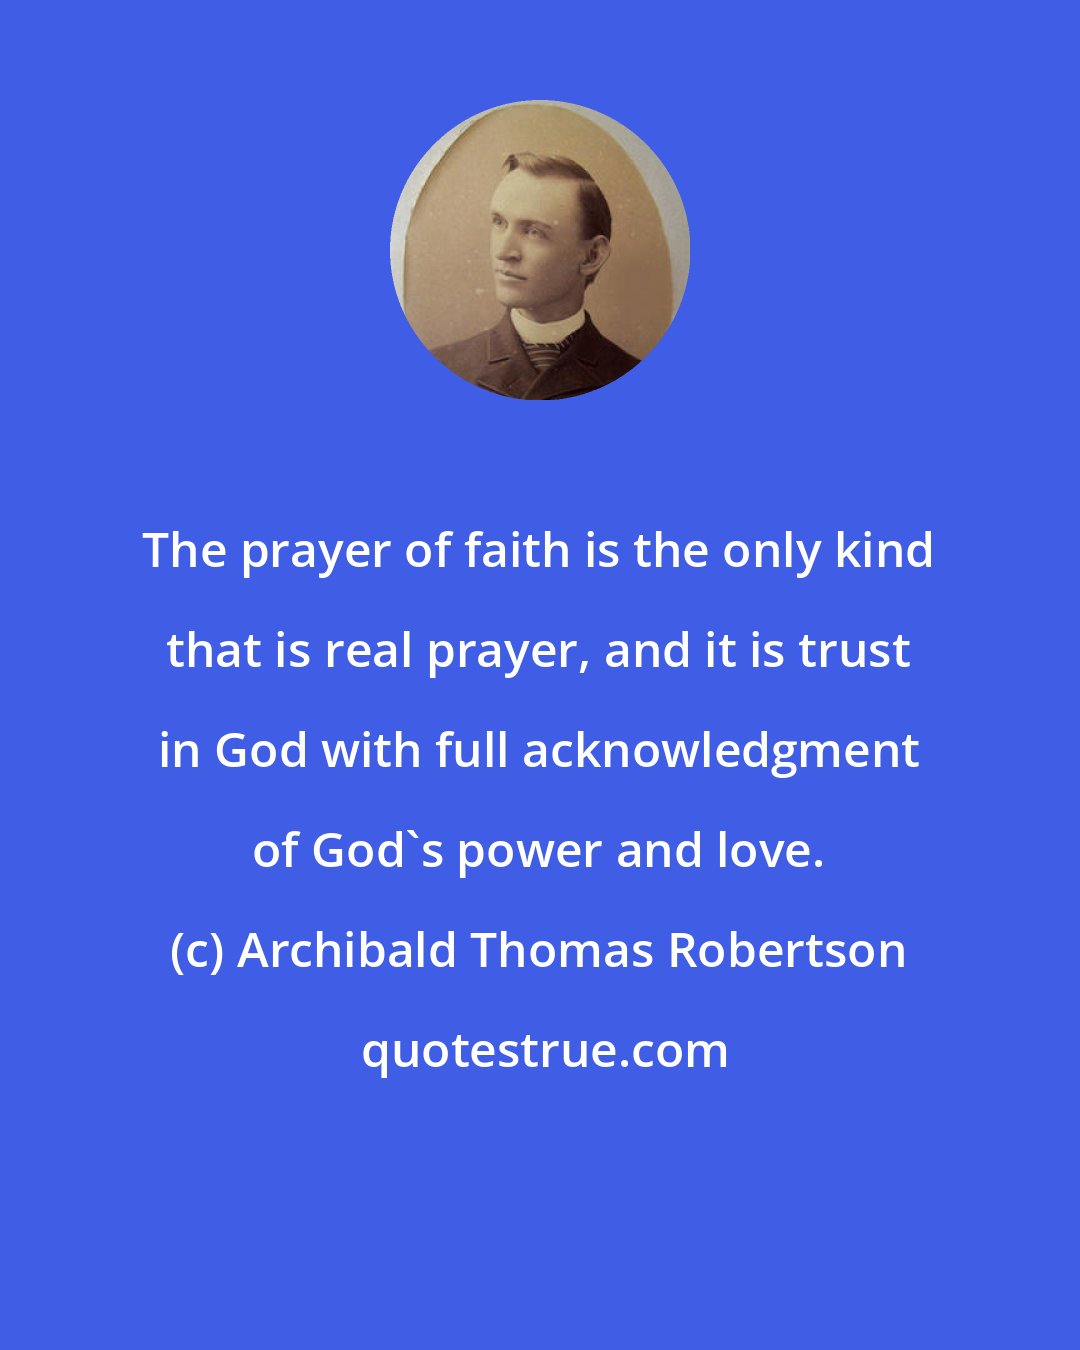 Archibald Thomas Robertson: The prayer of faith is the only kind that is real prayer, and it is trust in God with full acknowledgment of God's power and love.